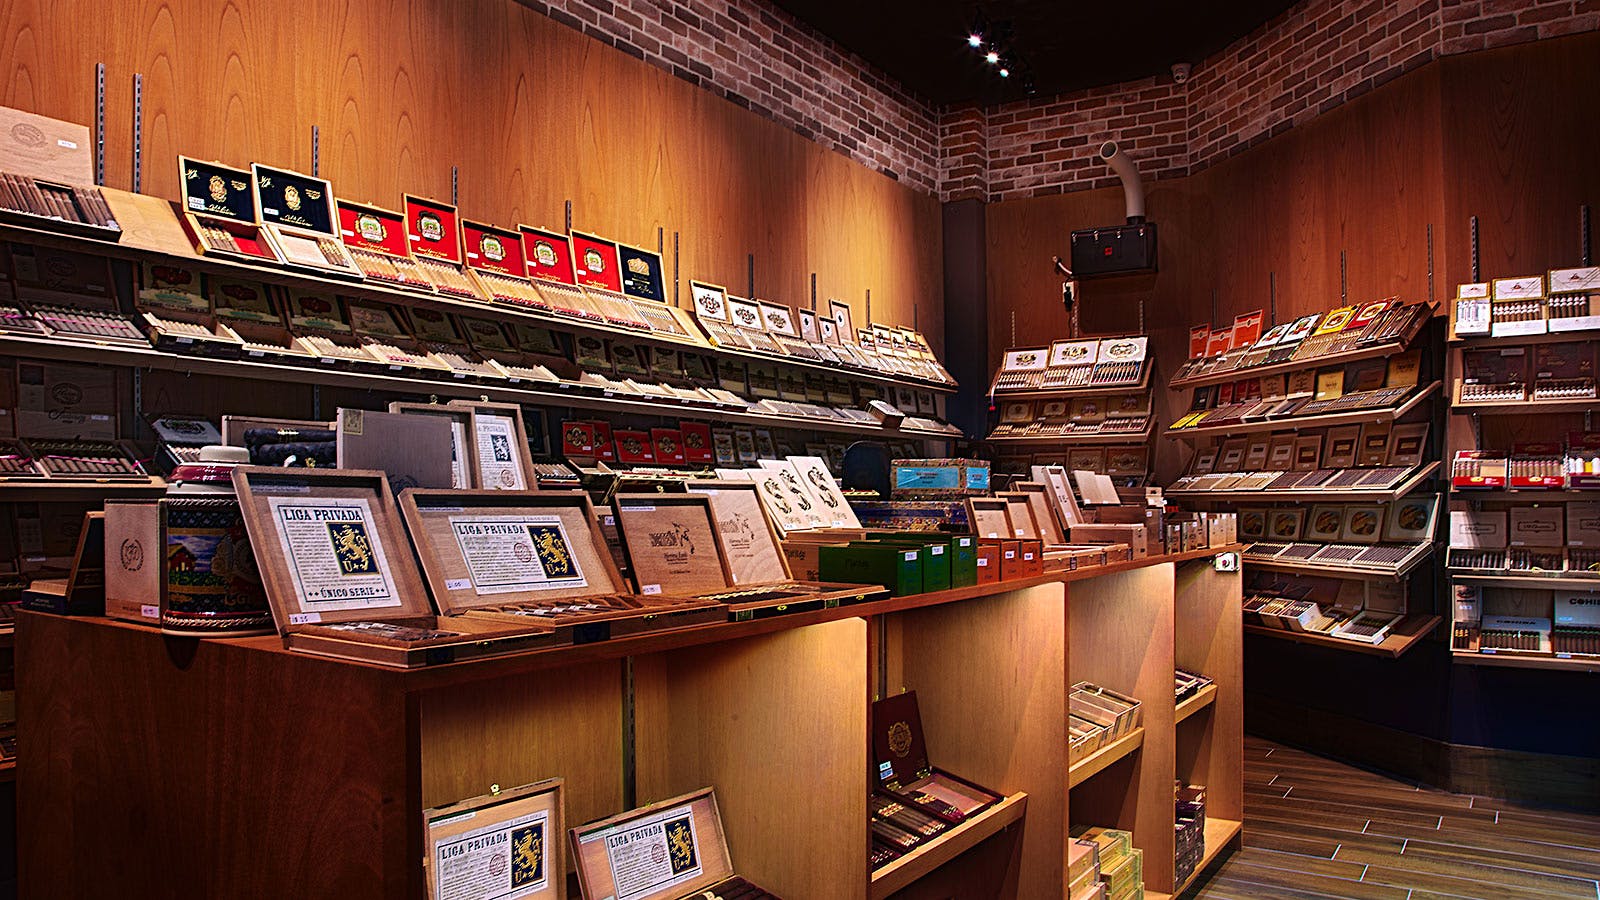 The humidor shelves are stocked with many great cigars, some of them hard to find.